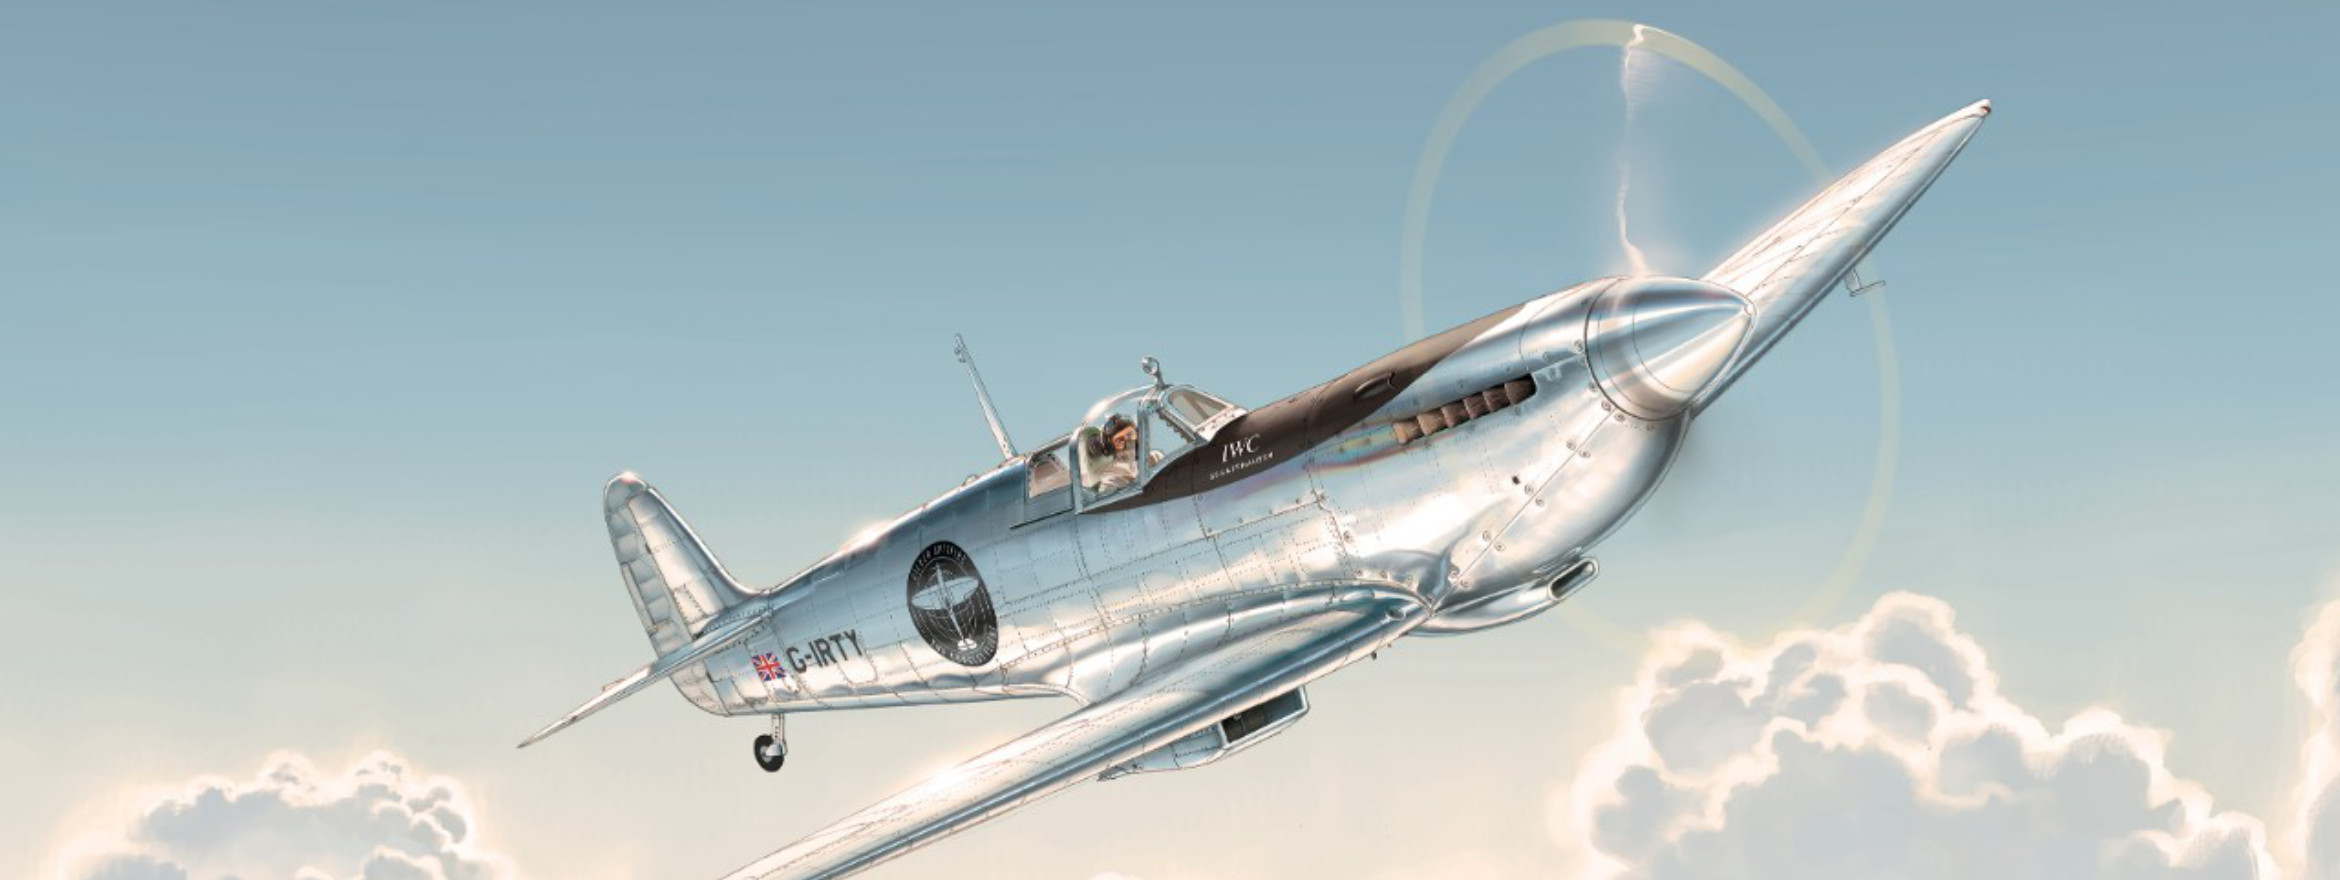 IWC’s Spitfire Takes to the Skies